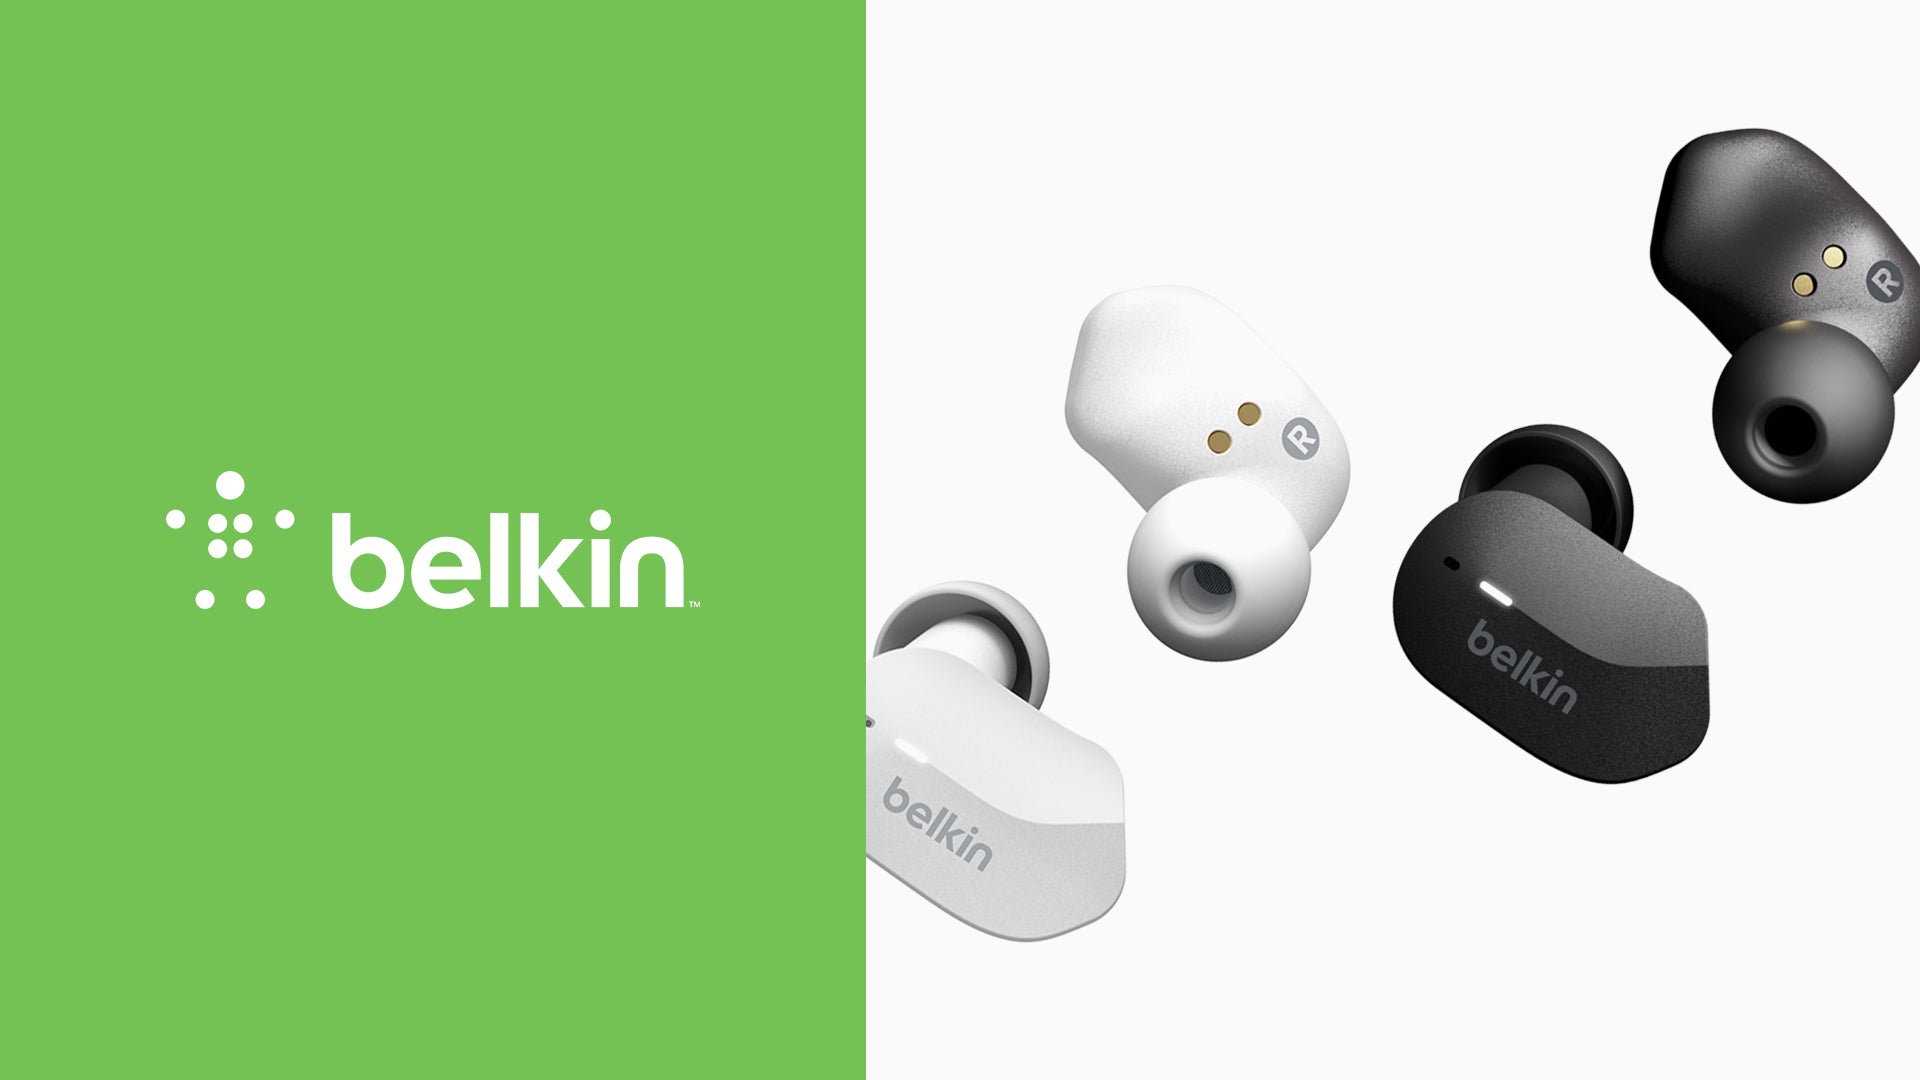 Our top 5 Belkin product picks.